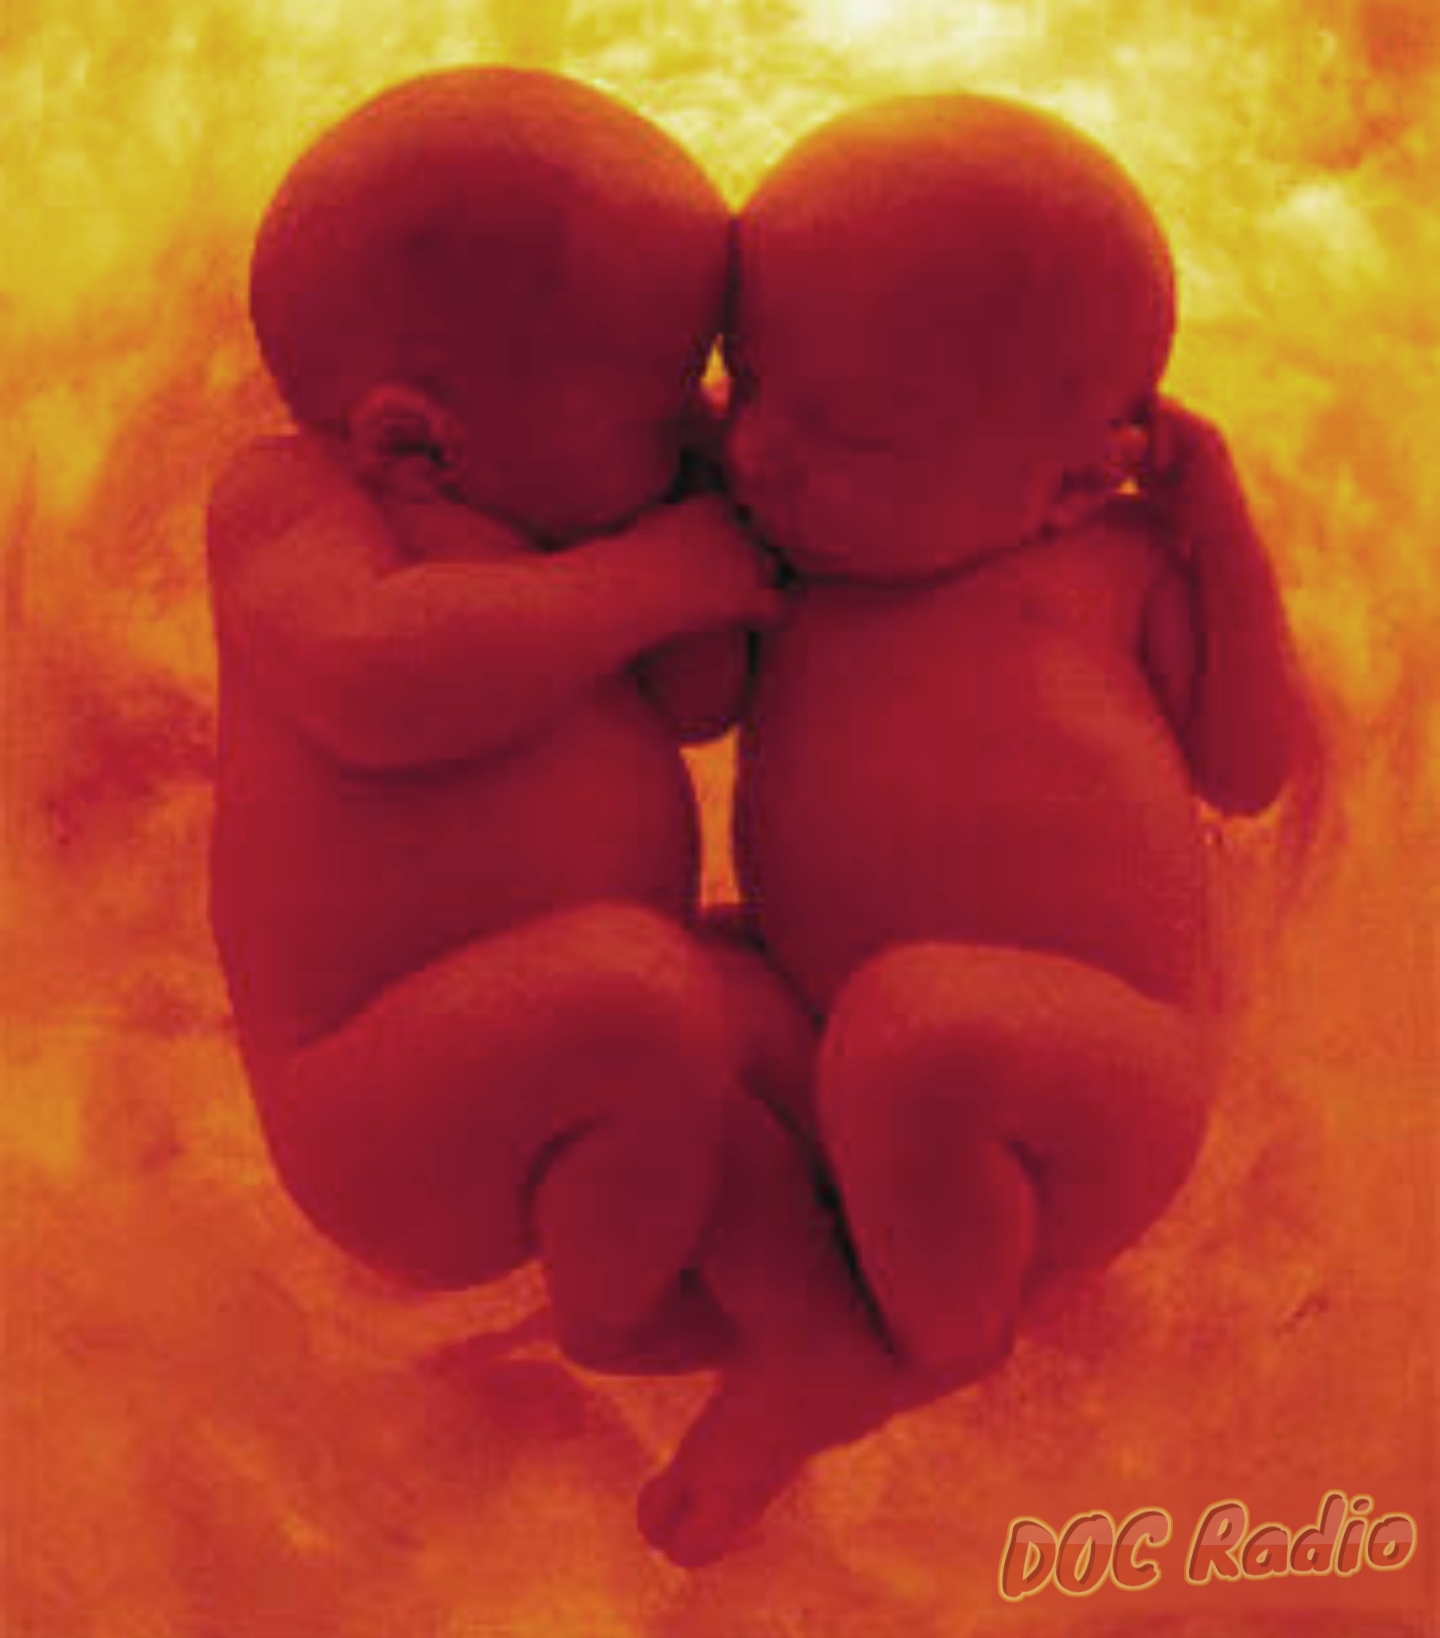 Does God exist? 2 babies talk in the womb of life after delivery in a parable about faith